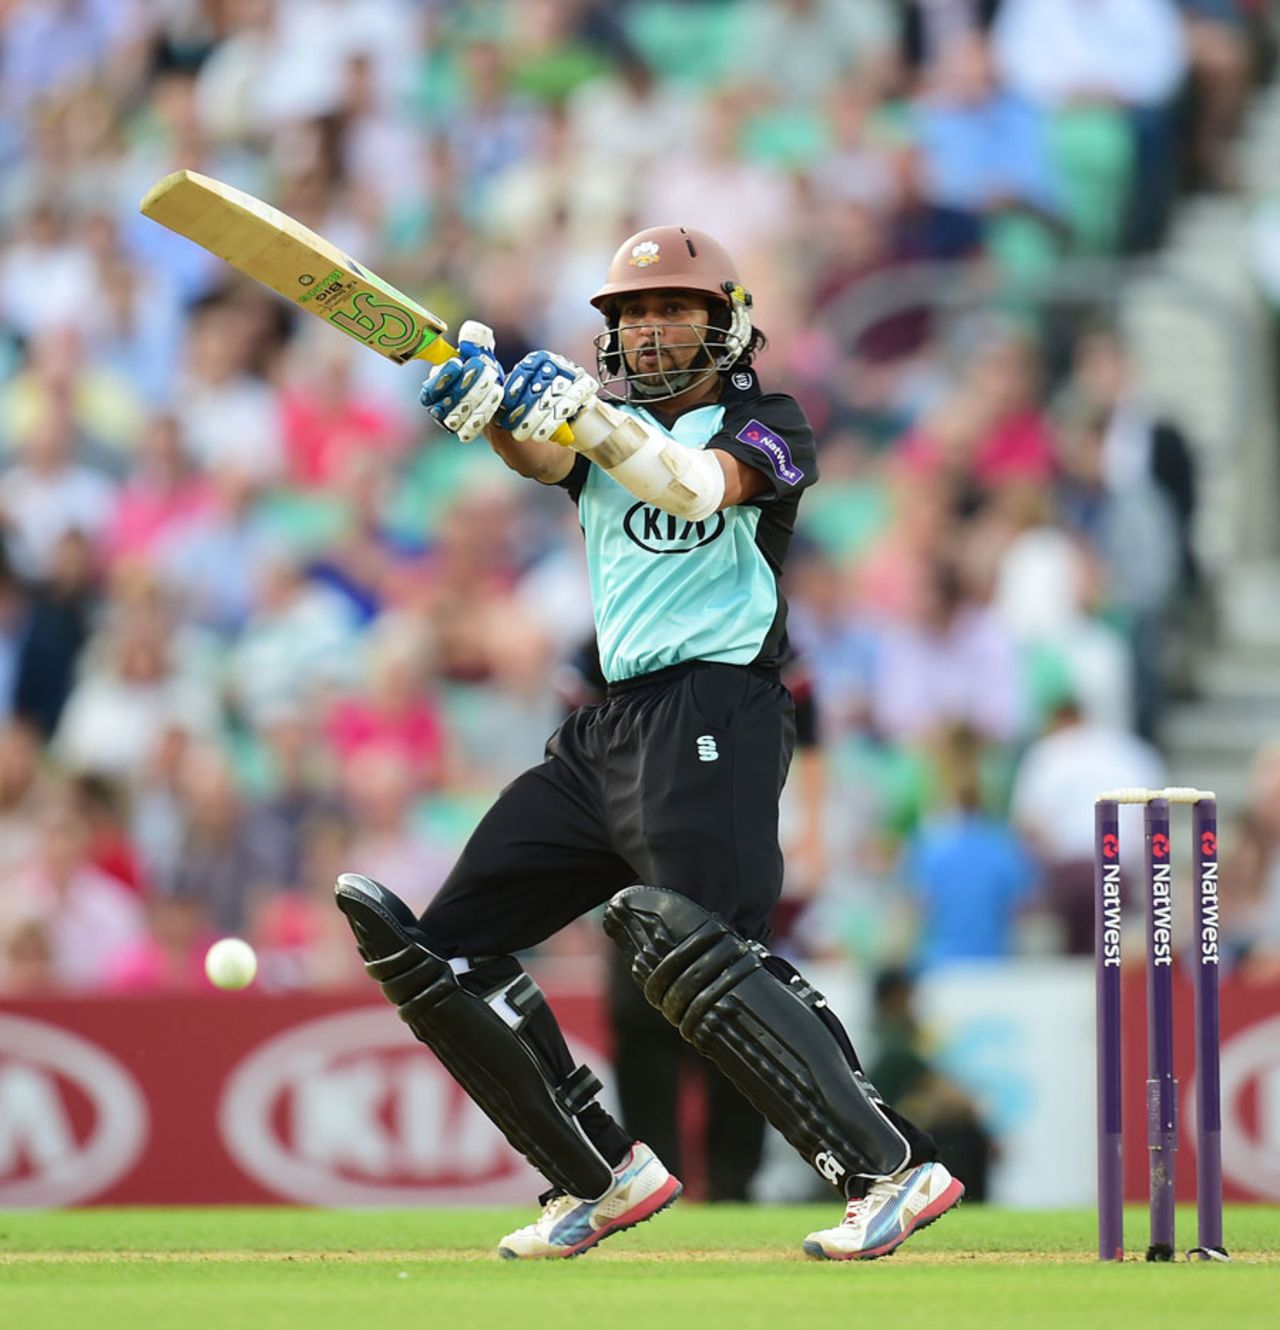 Tillakaratne Dilshan pulls on his way to 29, Surrey v Somerset, NatWest T20 Blast, The Oval, July 17, 2014